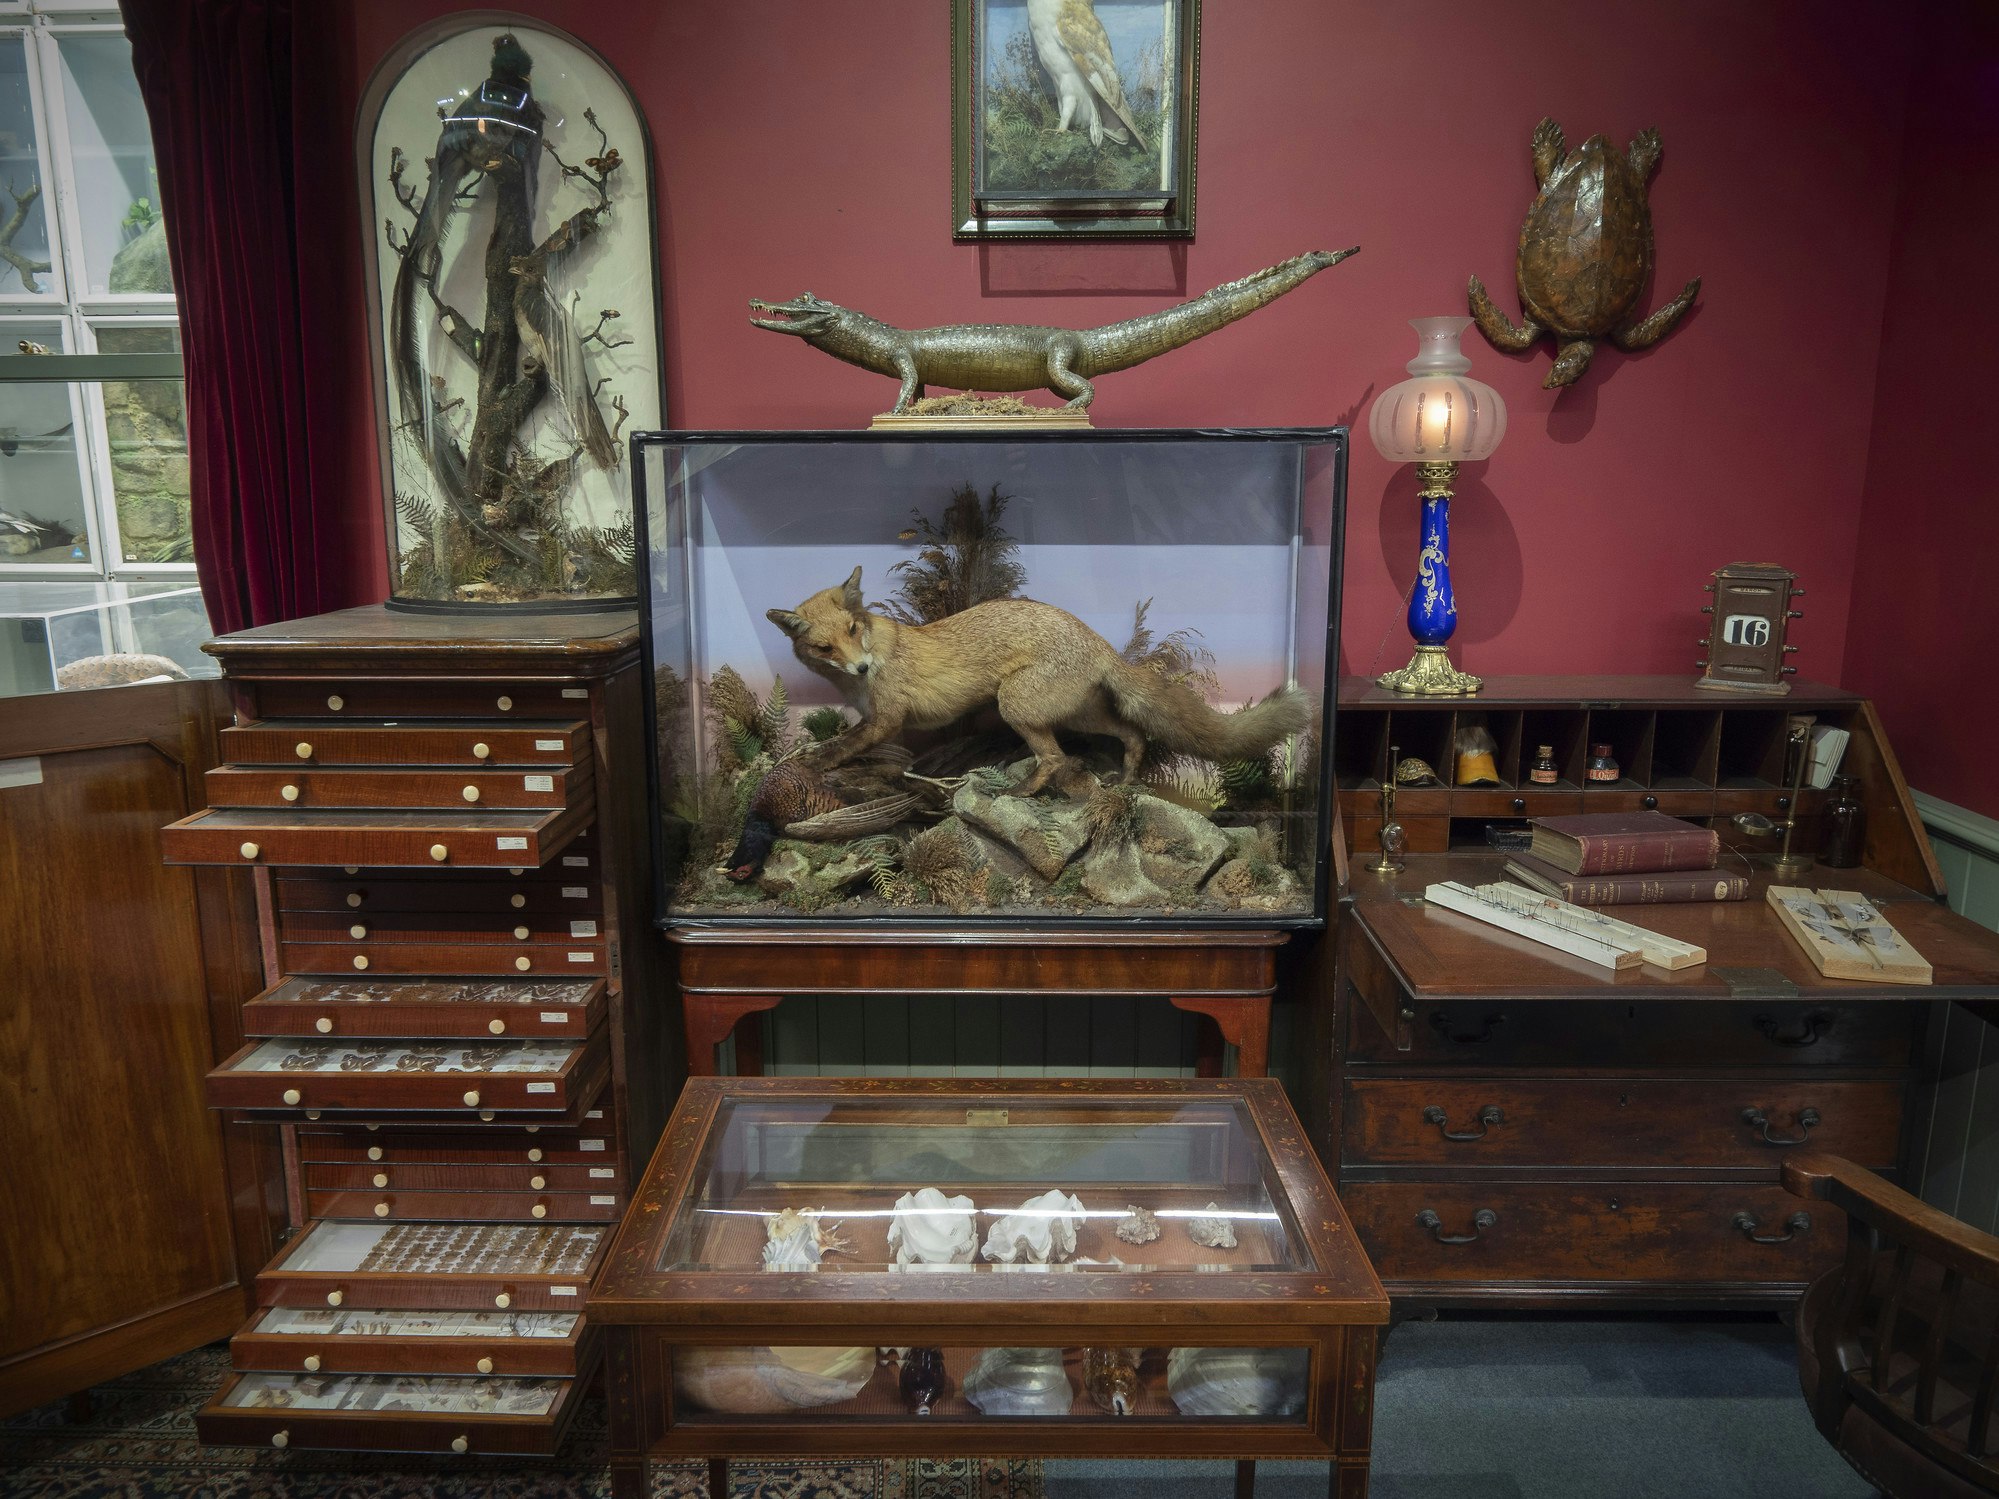 Inside a quirky museum; mahogany cabinets are arranged to view the preserved animal specimens inside, the largest of which contains a taxidermic fox. The walls are painted a rich claret colour.